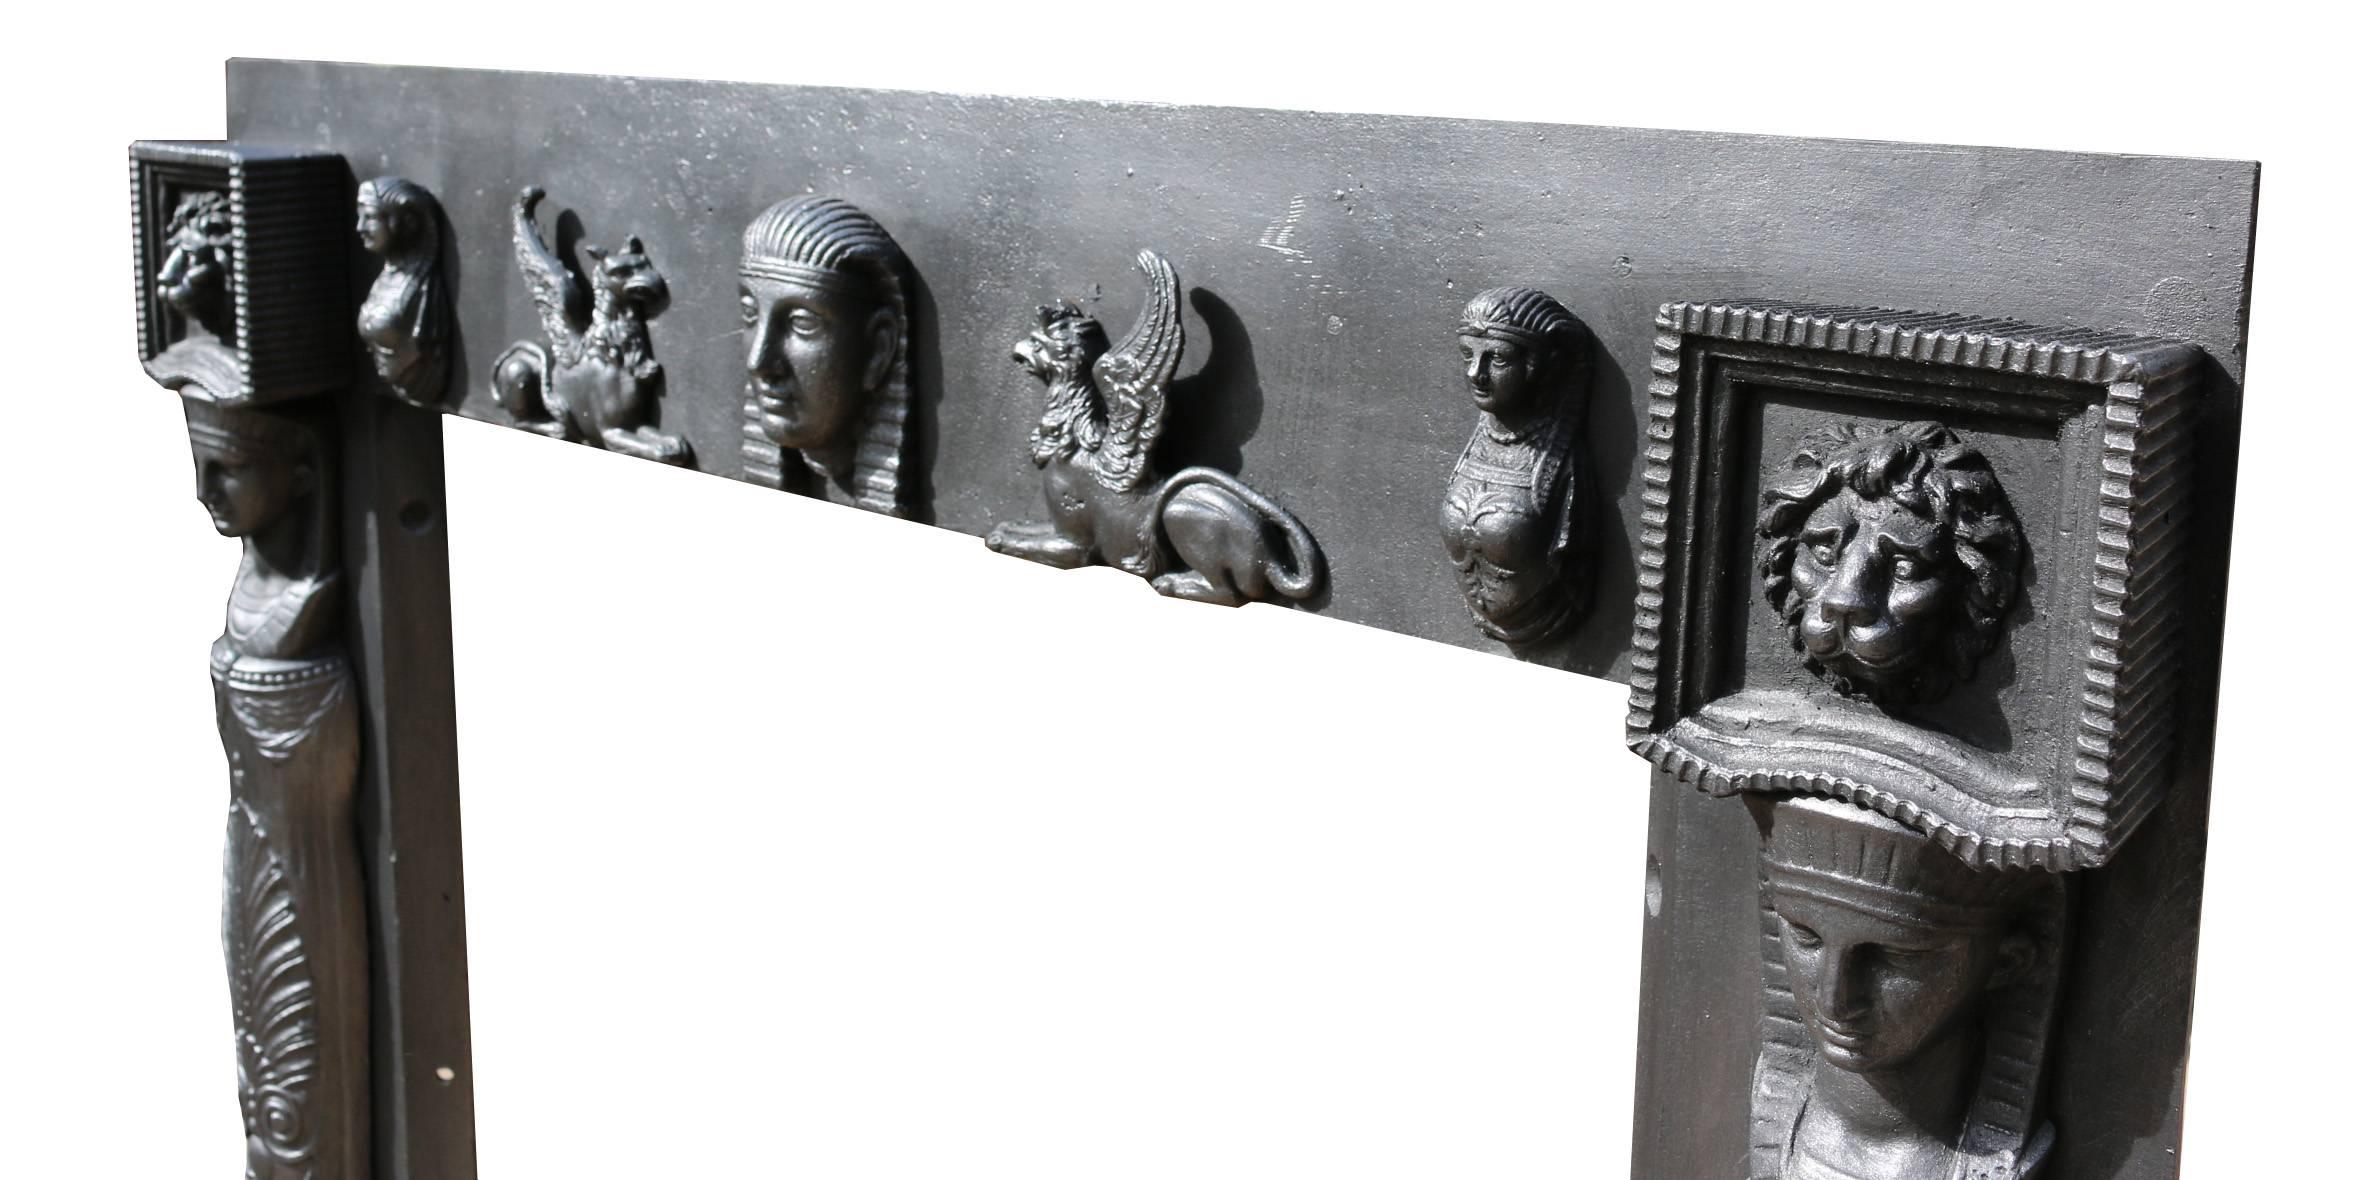 Highly decorated fire grate/front in Egyptian style, circa 1820. 
Measures: Opening height 80.5 cm, opening width 62.5 cm
Weight 50 kg.